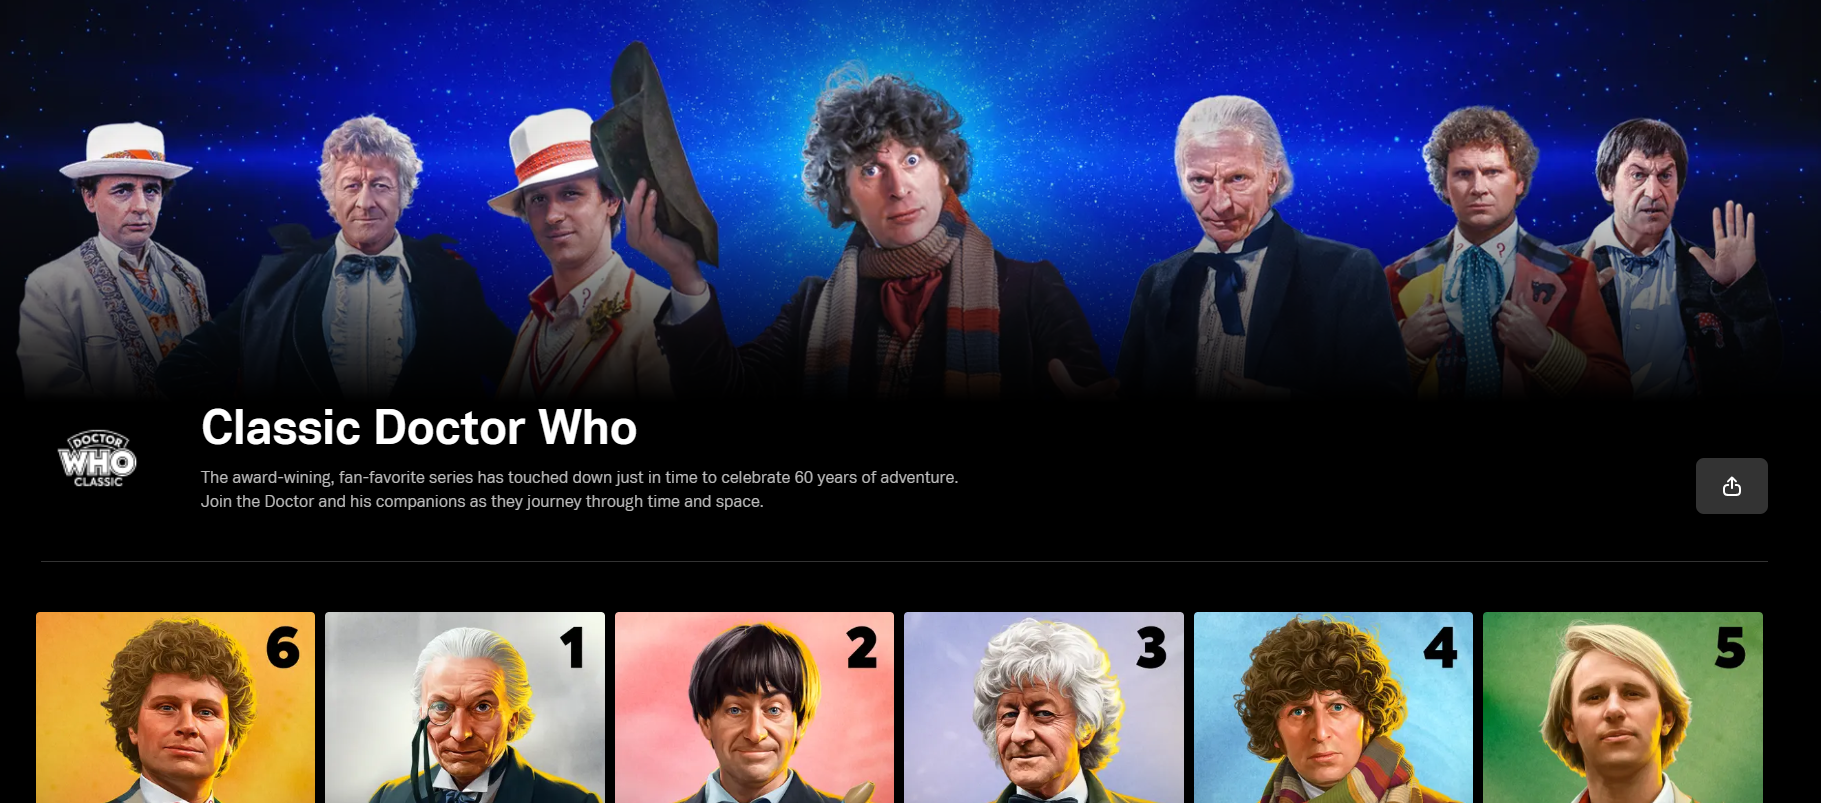 Tubi is Adding Every Episode of BBC’s Classic Doctor Who for Free